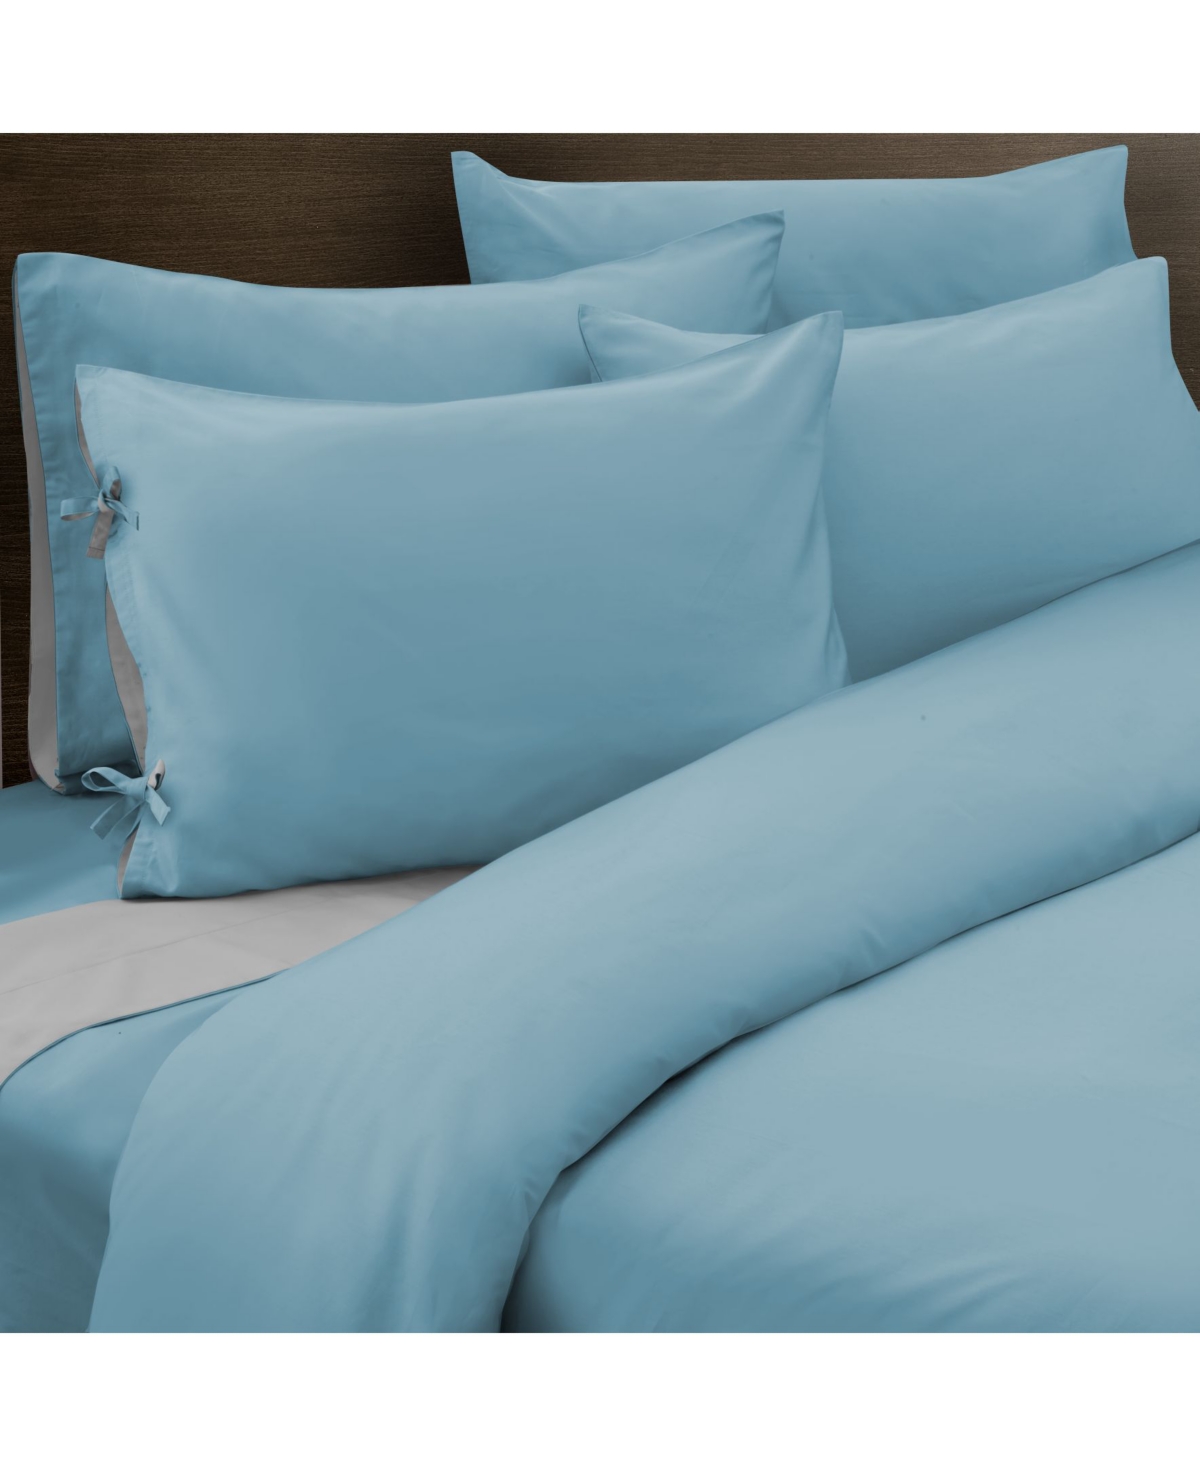 Grace Home Fashions Flip Totally Reversible 500 Thread Count 3 Piece Duvet, Full/queen Bedding In Aqua/silver